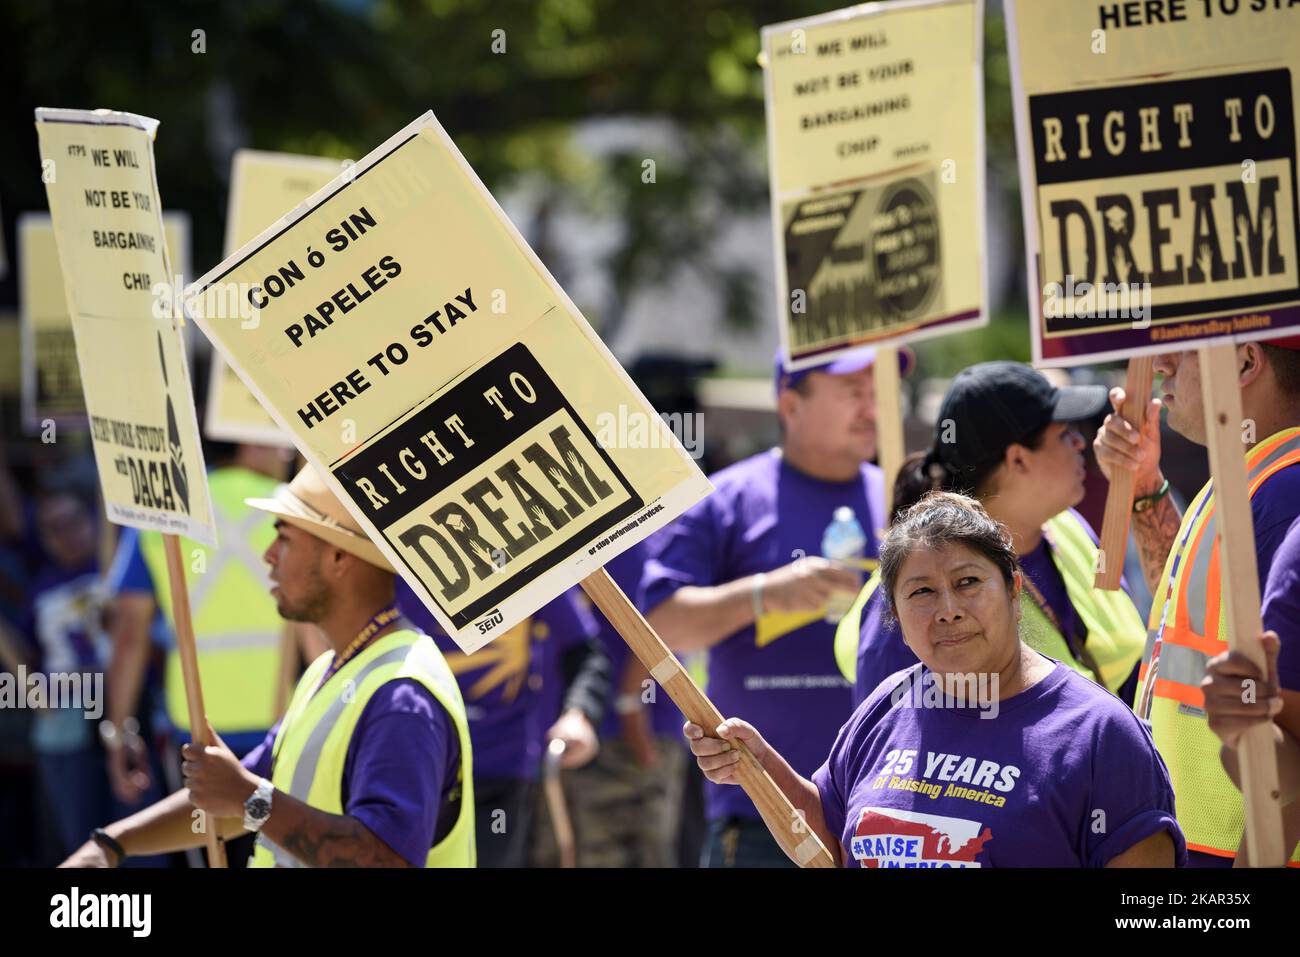 Immigration rights activists protest the Trump administration's termination of the DACA program in Los Angeles, California on September 5, 2017. The Deferred Action for Childhood Arrivals program protected 800,000 young undocumented immigrants from deportation. (Photo by Ronen Tivony/NurPhoto) Stock Photo